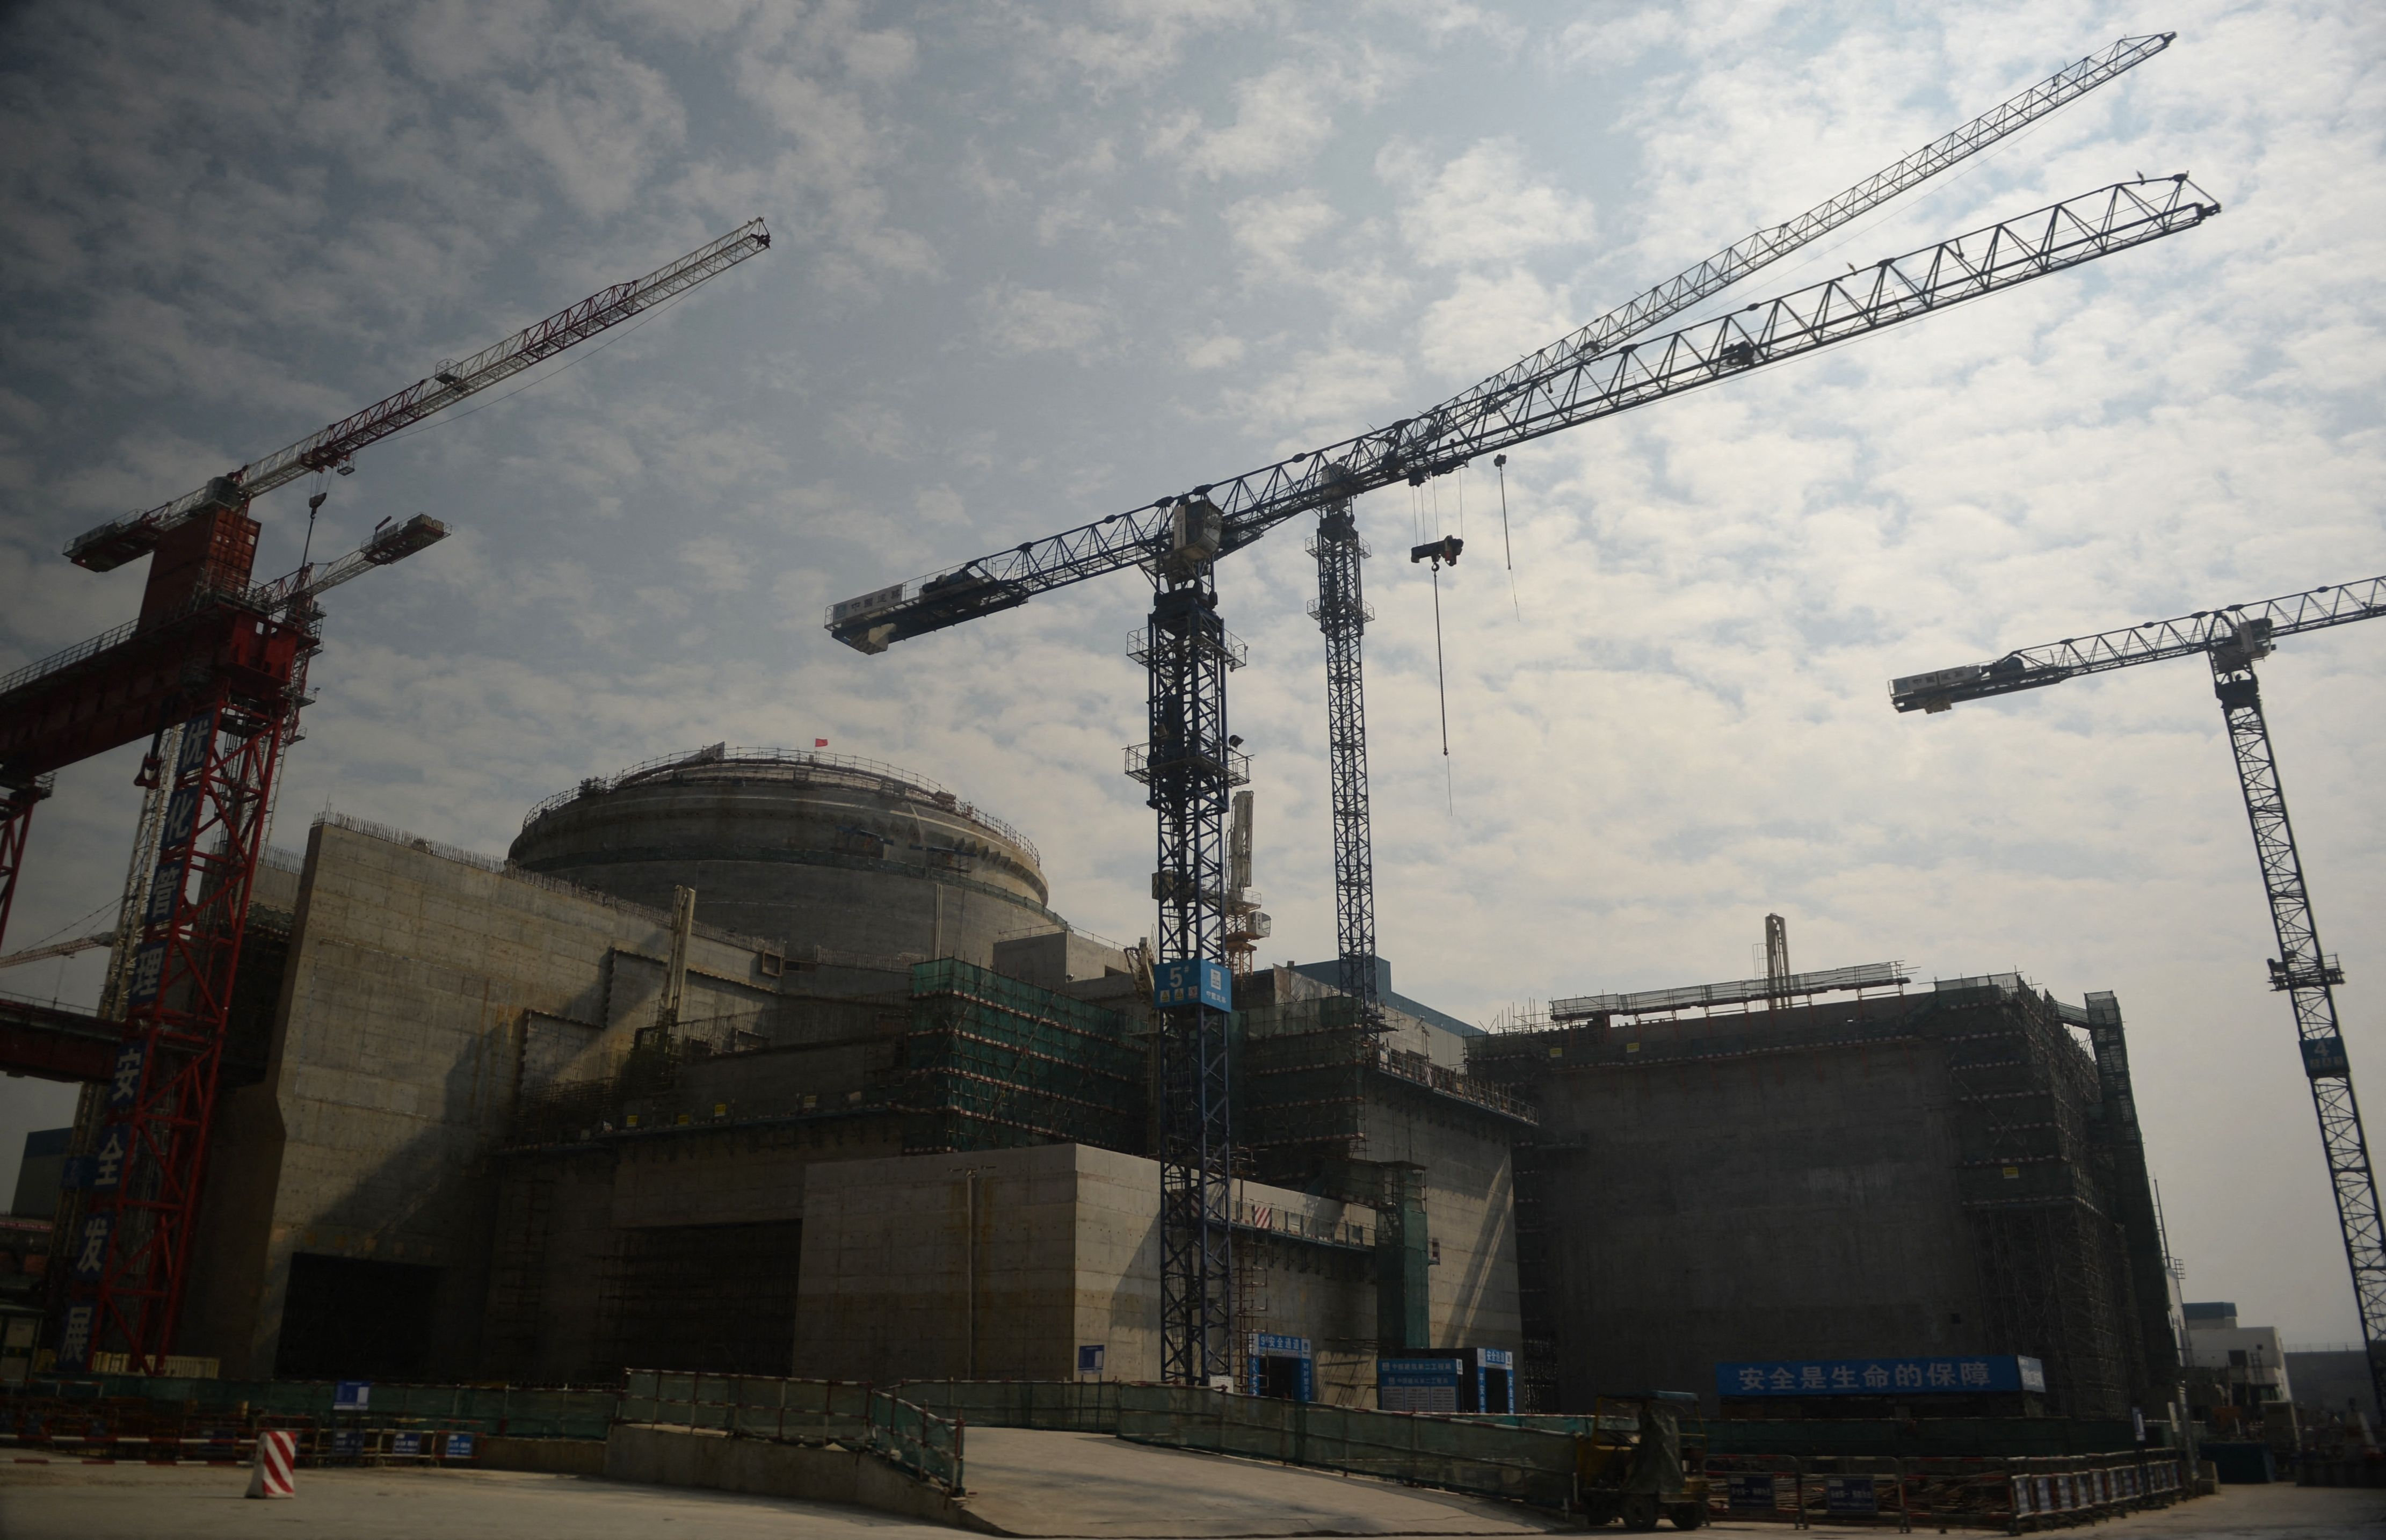 China nuclear plant works to fix issue, ops 'within safety parameters'